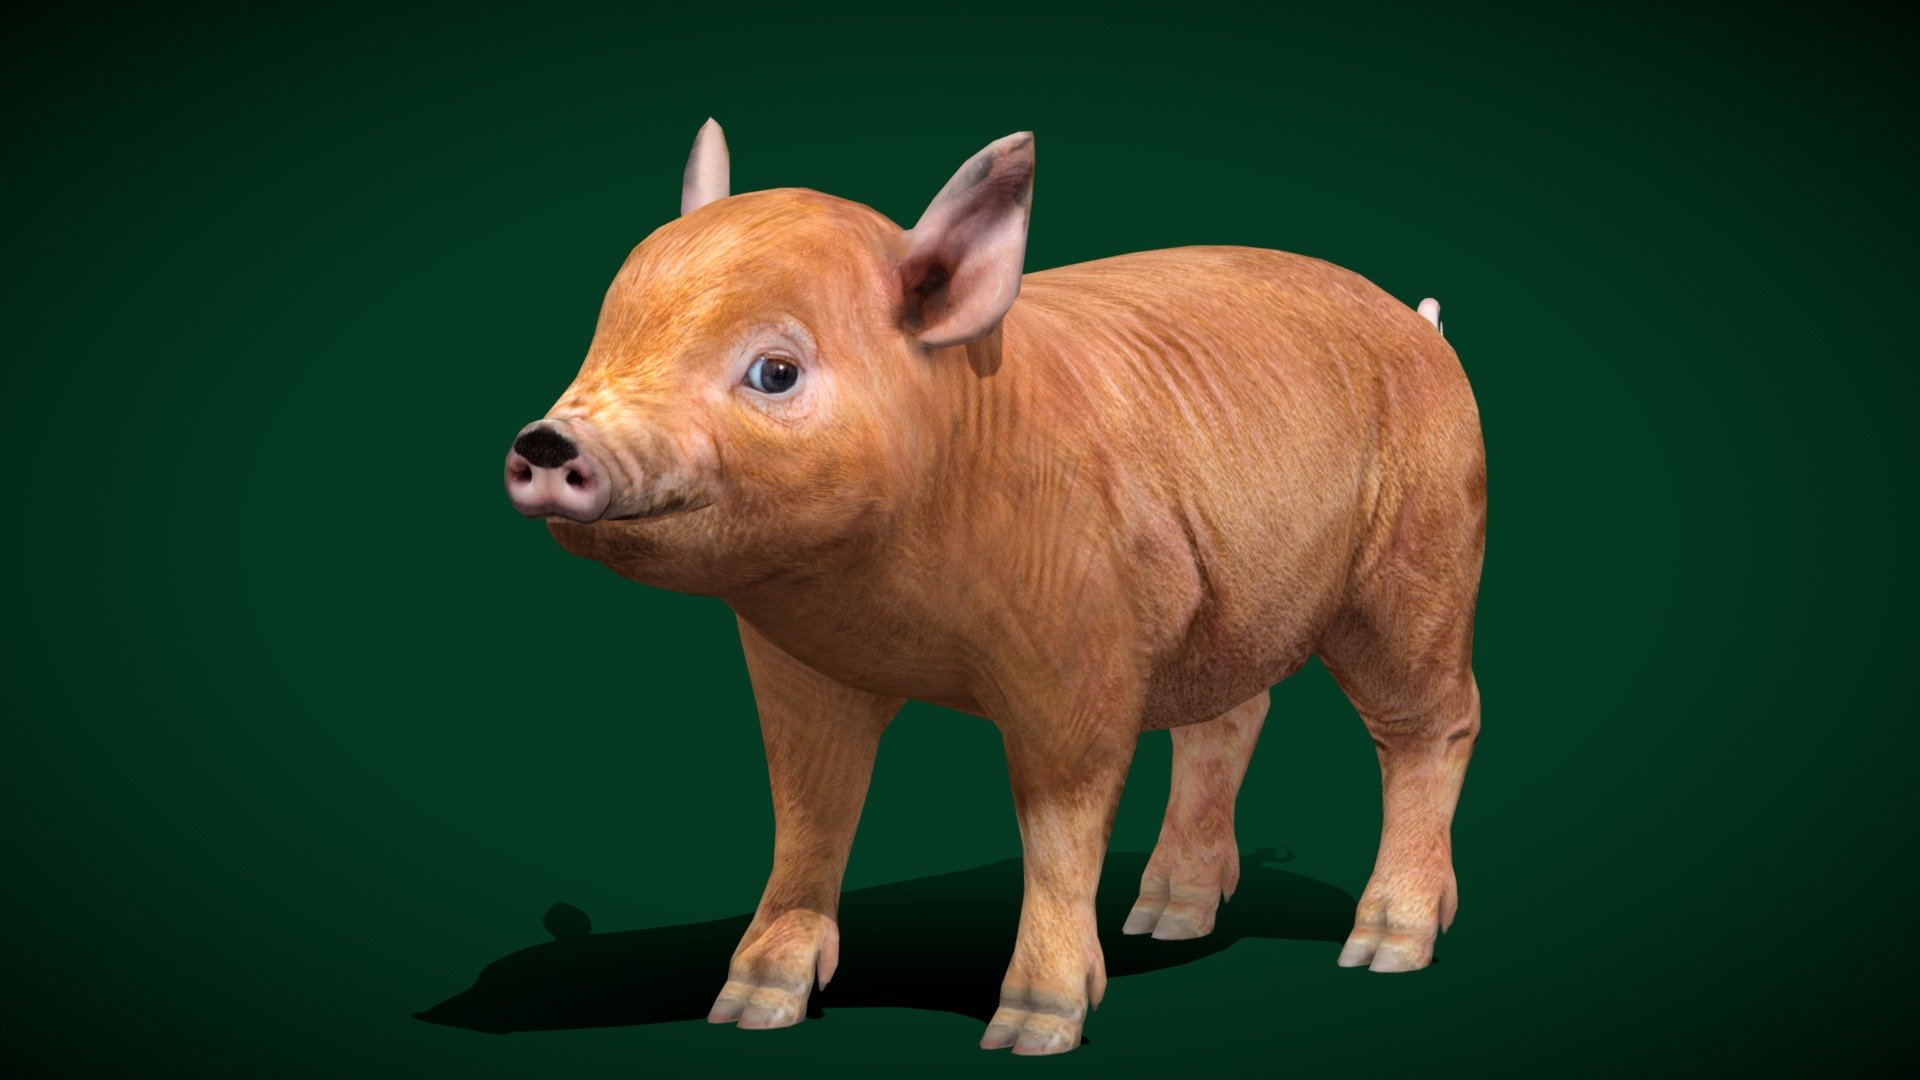 Miniature  Pig (Mini Pig) Pygmy Pig

Sus scrofa domesticus Pig Mammal (Teacup Pig )

1 Draw Calls

Gameready

8 Animations

4K PBR Textures Material

Unreal FBX

Unity FBX  

Blend File 

USDZ File (AR Ready). Real Scale Dimension

Textures Files

GLB File

Gltf File ( Spark AR, Lens Studio(SnapChat) , Effector(Tiktok) , Spline, Play Canvas ) Compatible



Triangles: 5008

Vertices: 2523



Diffuse , Metallic, Roughness , Normal Map ,Specular Map,AO

Miniature Pigs, also called mini pig, or Pygmy pig, or teacup pig, are small breeds of domestic pig. There a two types of mini pig: small traditional pig breed like the Vietnamese Pot-Bellied pig, the Choctaw hog and the Kunekune and even smaller newer breeds like Göttingen minipig and Juliana pig 3d model